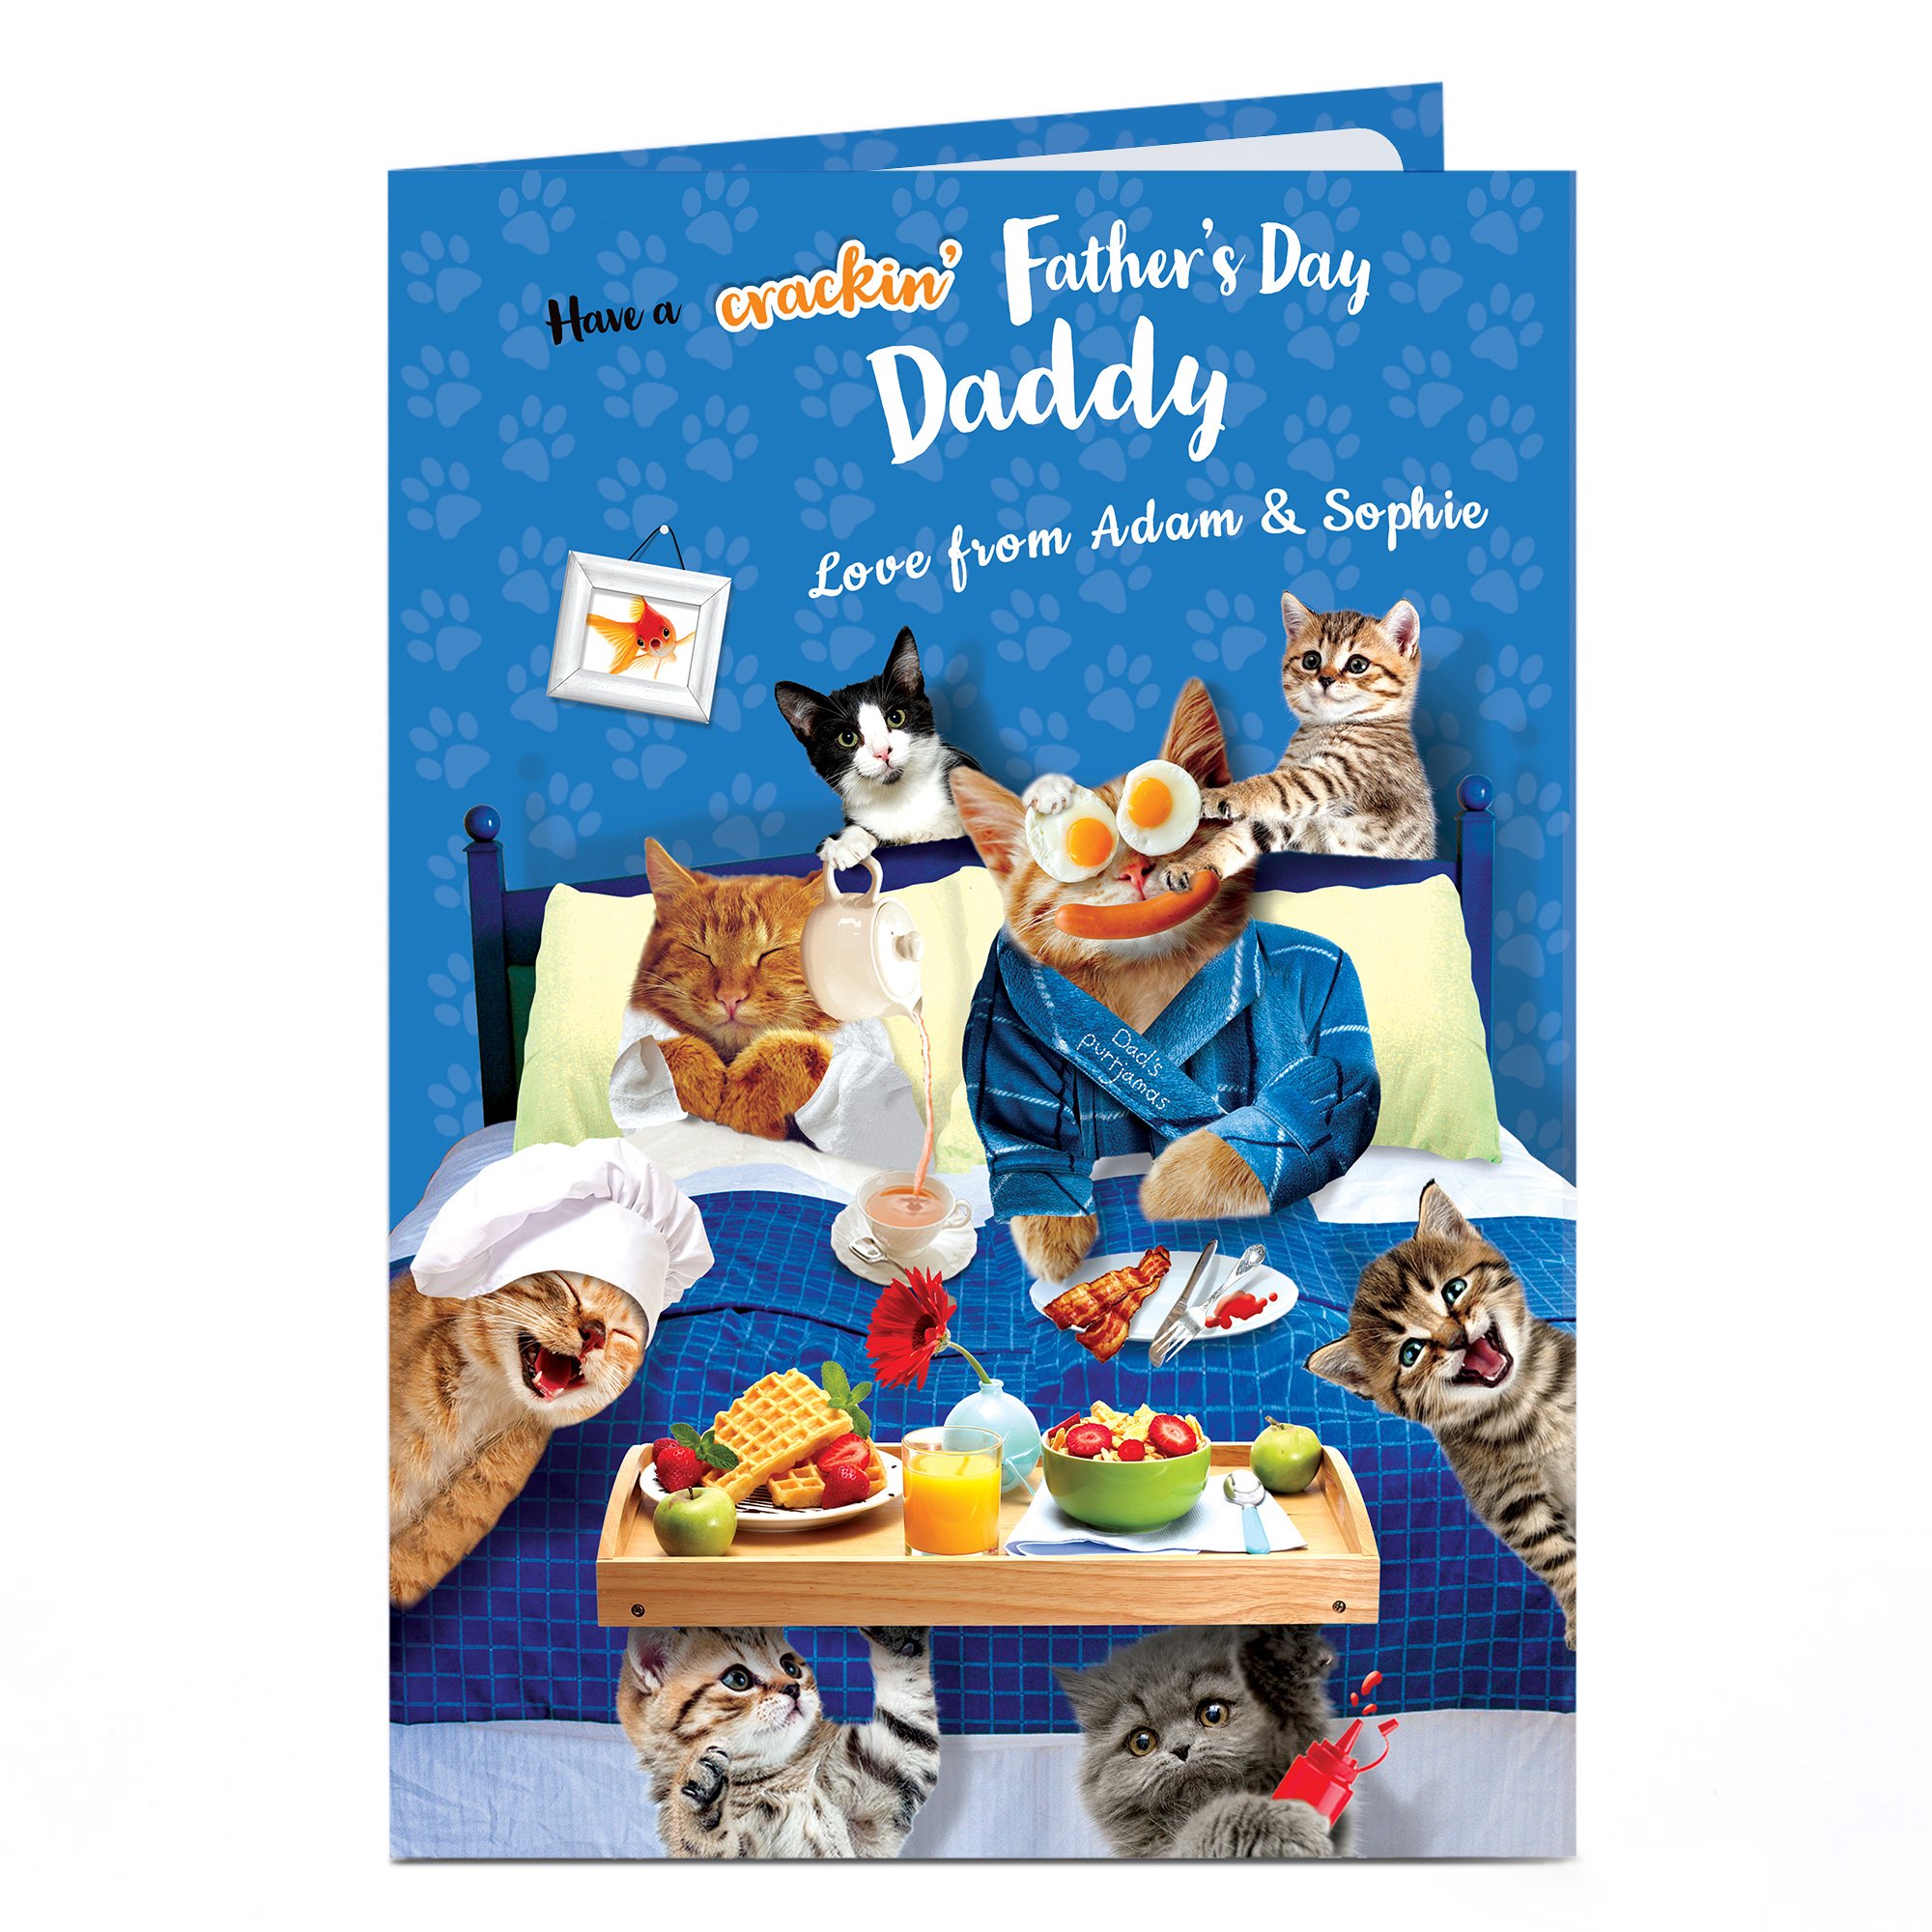 Personalised Father's Day Card - Crackin' Day Daddy